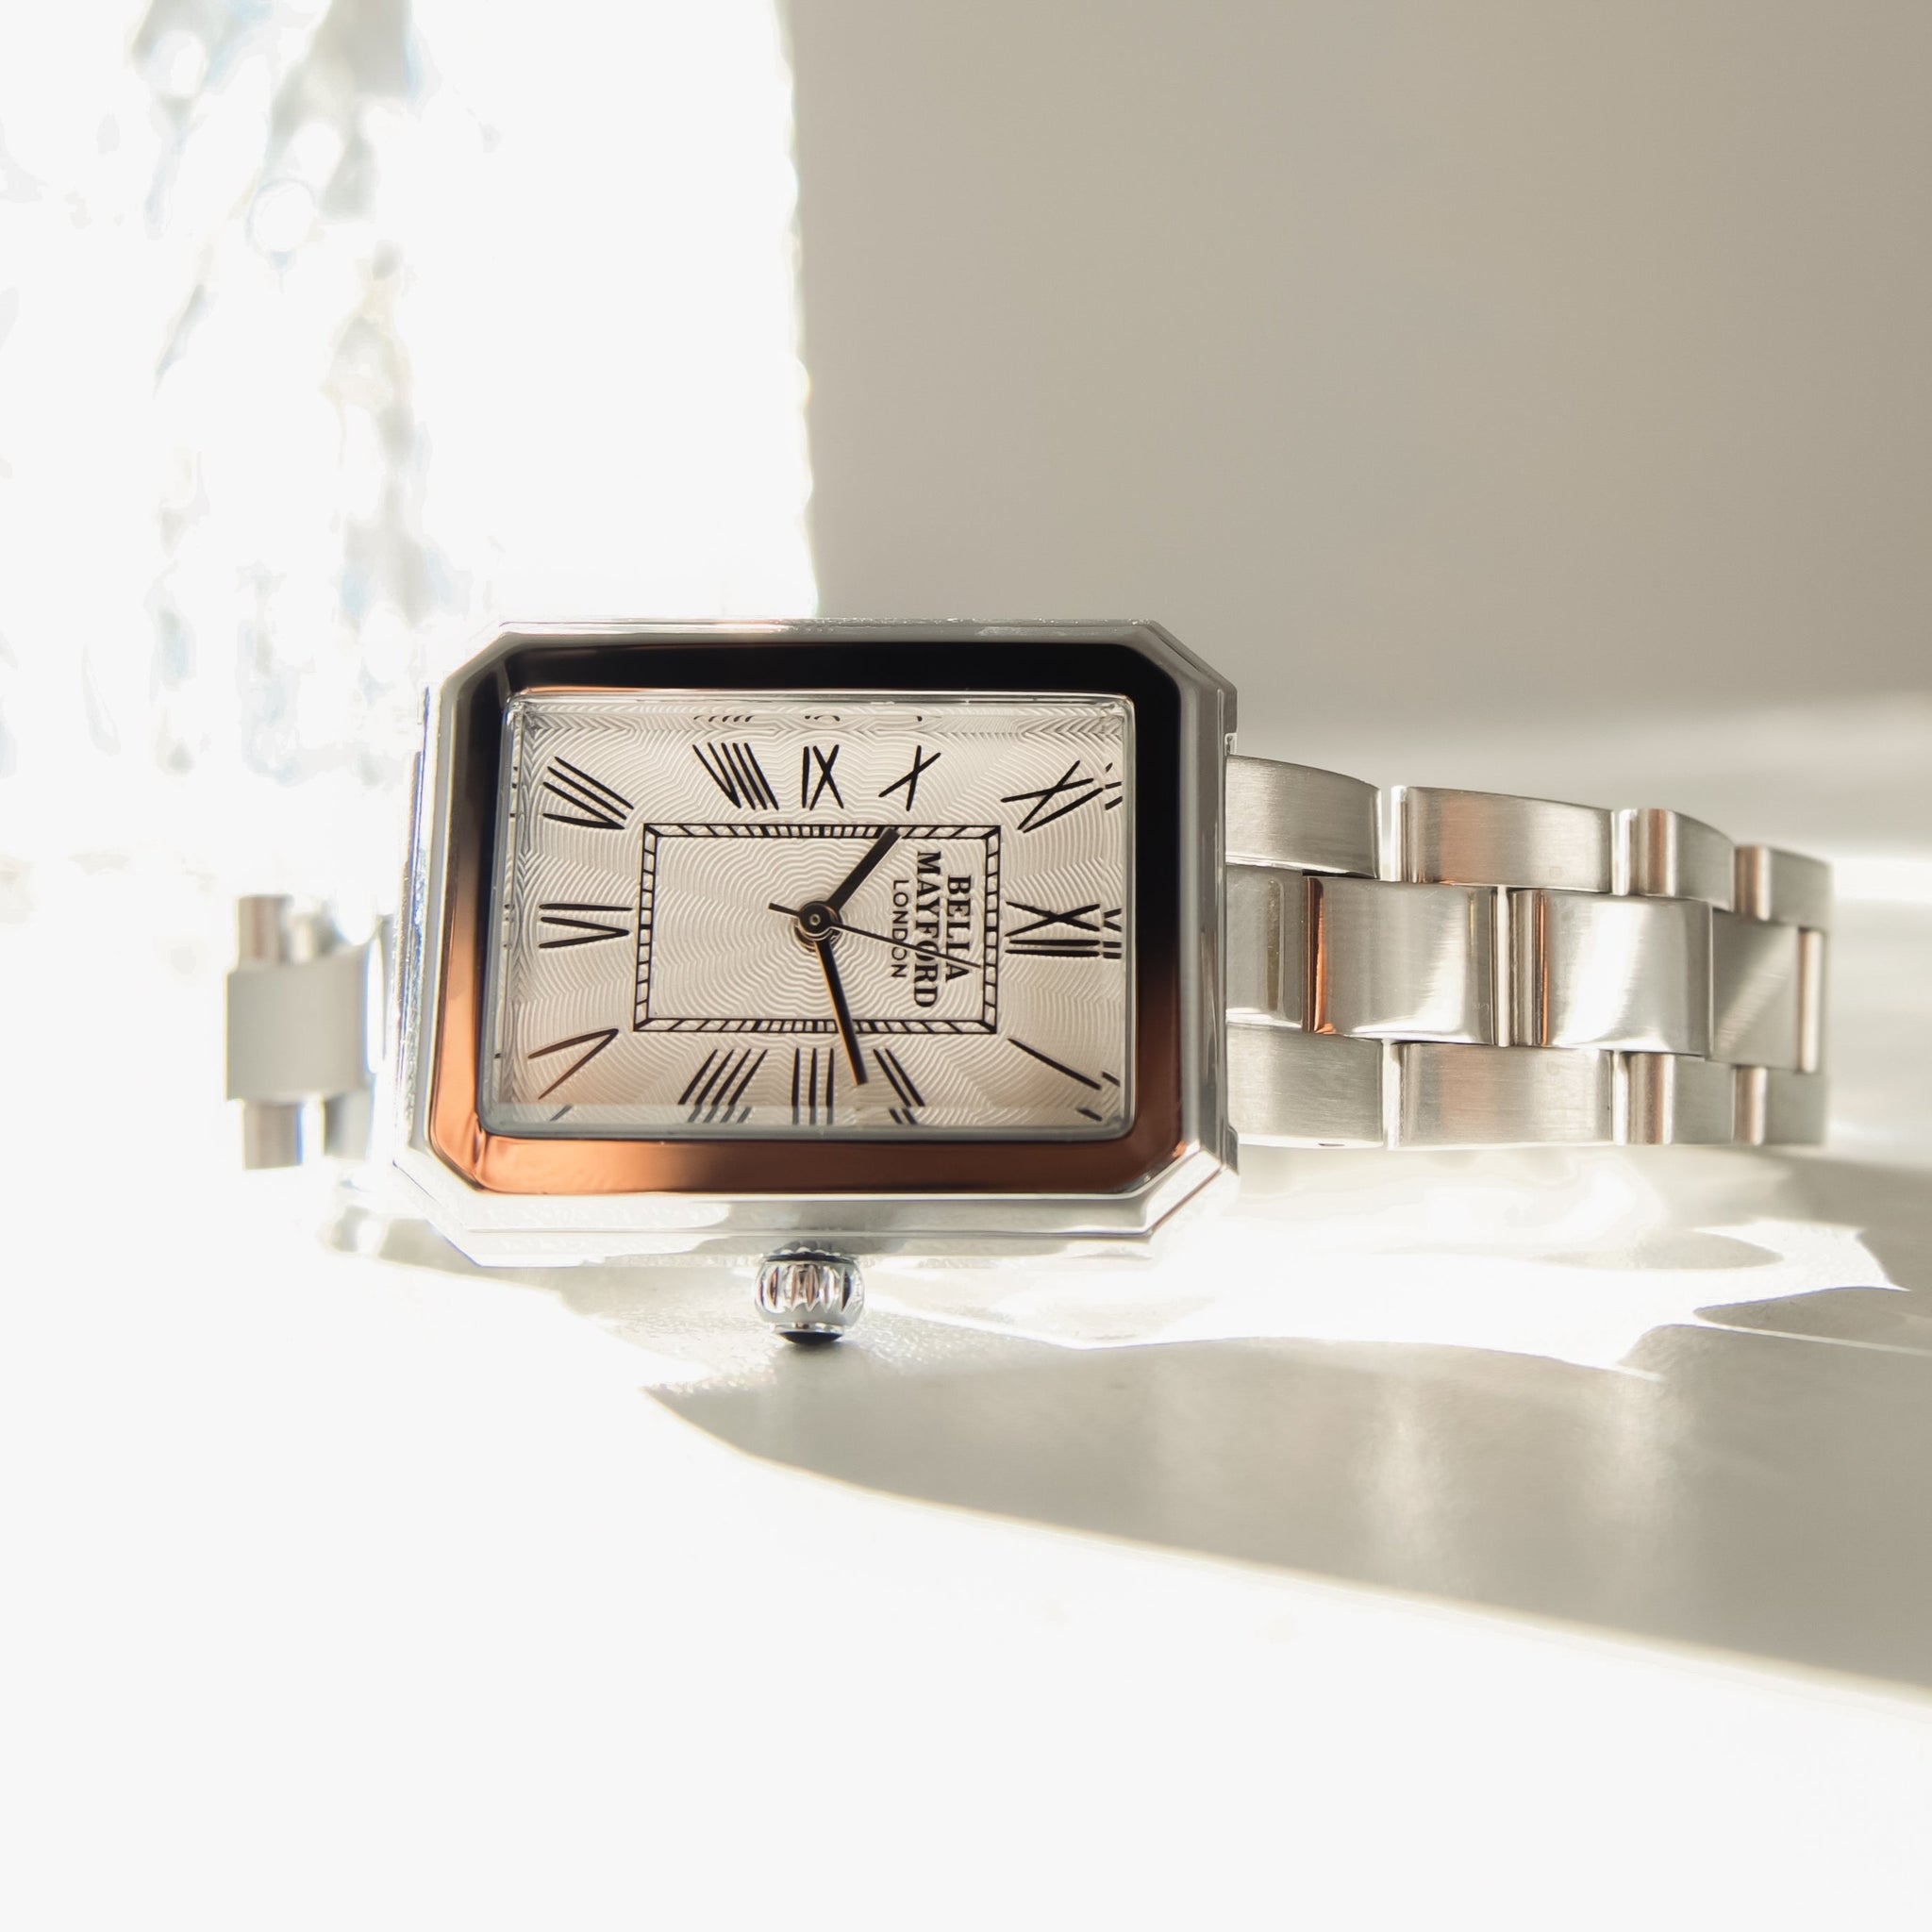 The Bold Grace Watch, Silver Stainless Steel Strap, White Face